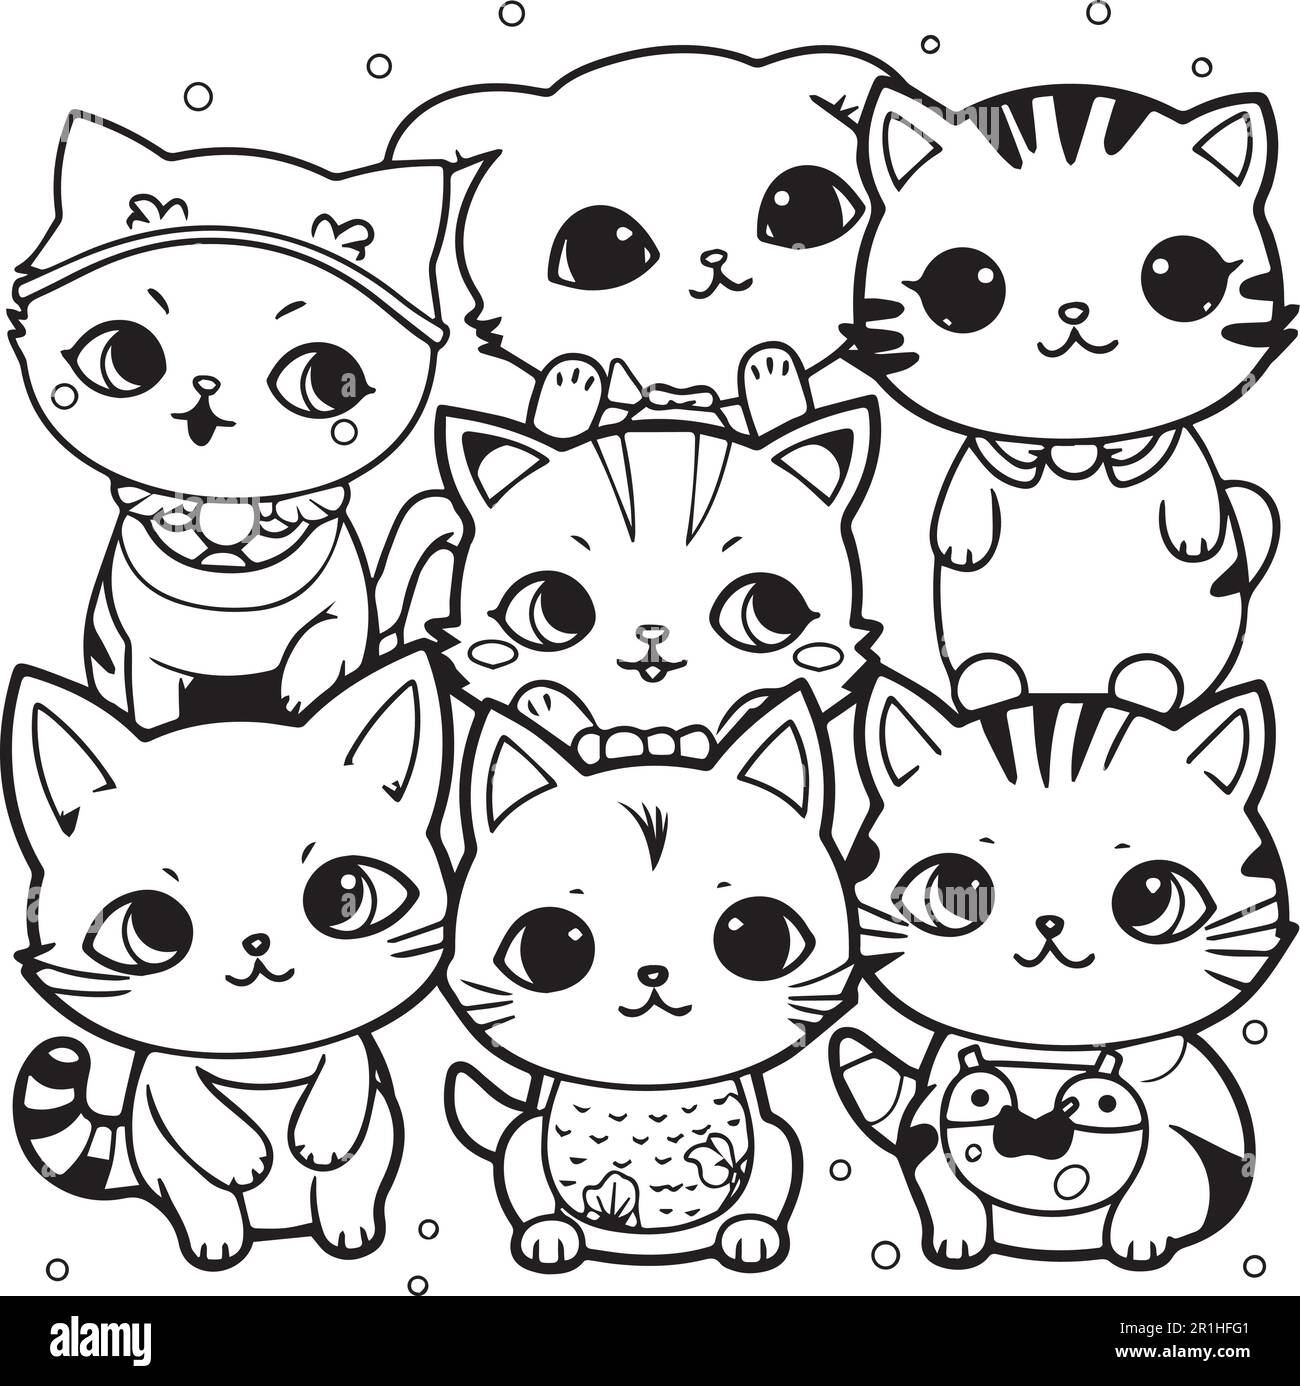 A black and white drawing of a group of cats coloring page. Stock Vector